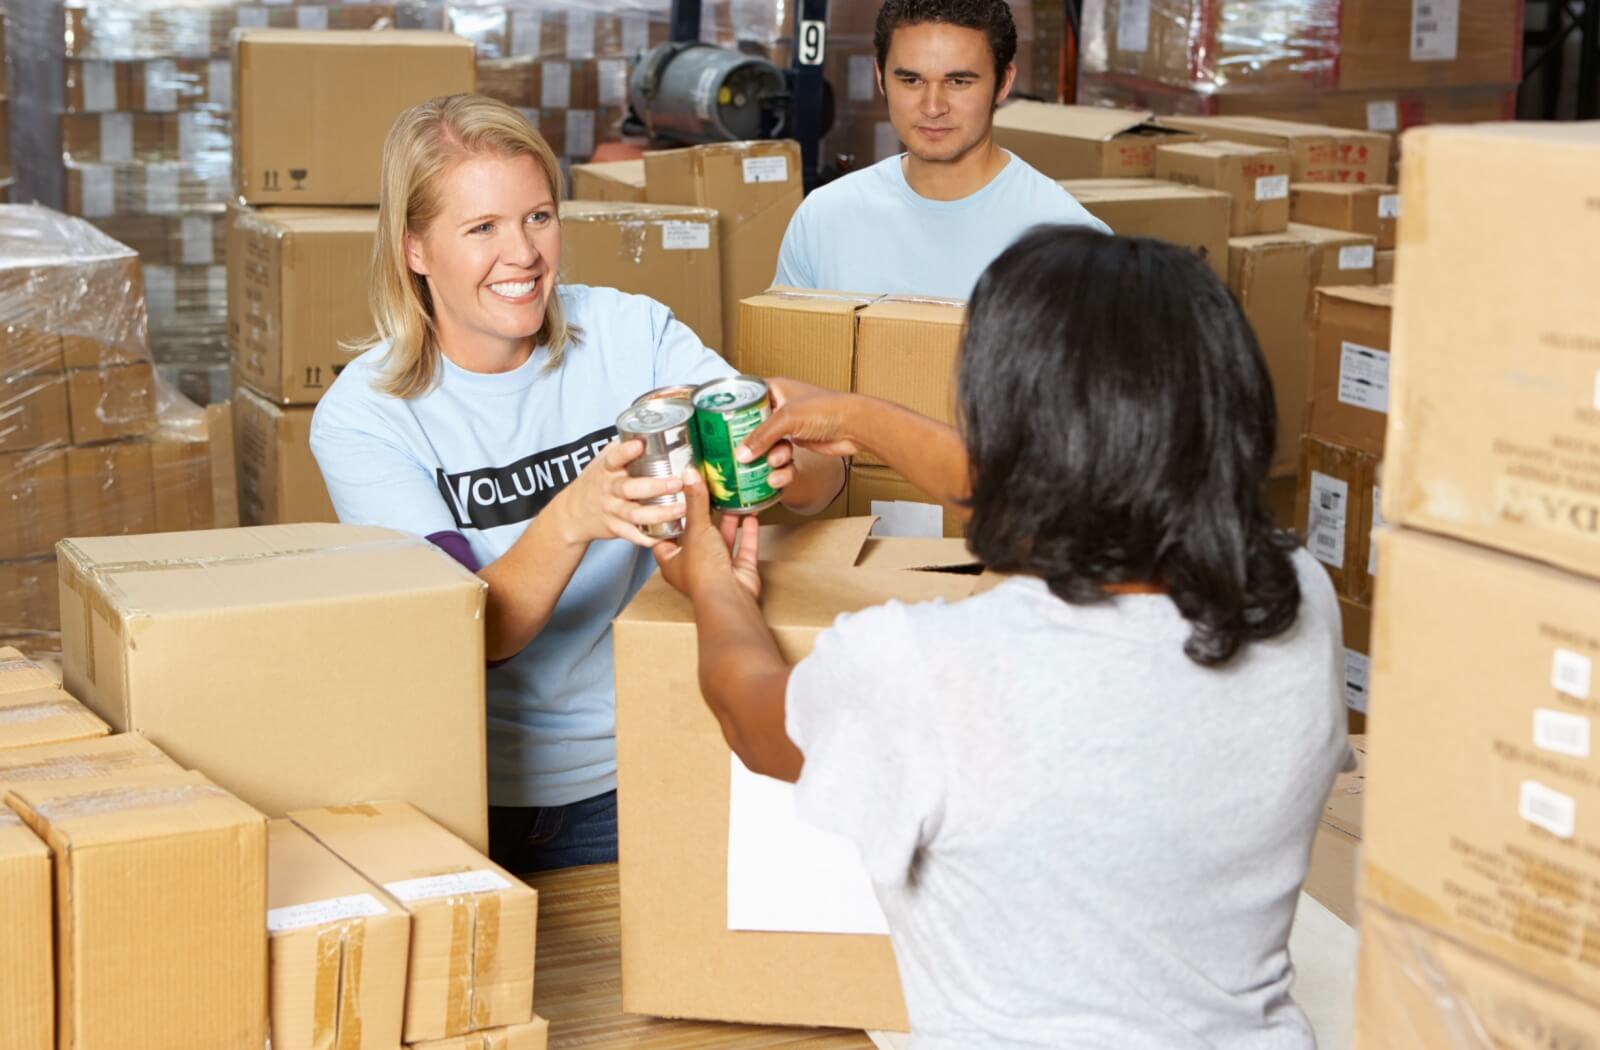 A food bank volunteer receiving the canned goods donation from a woman.